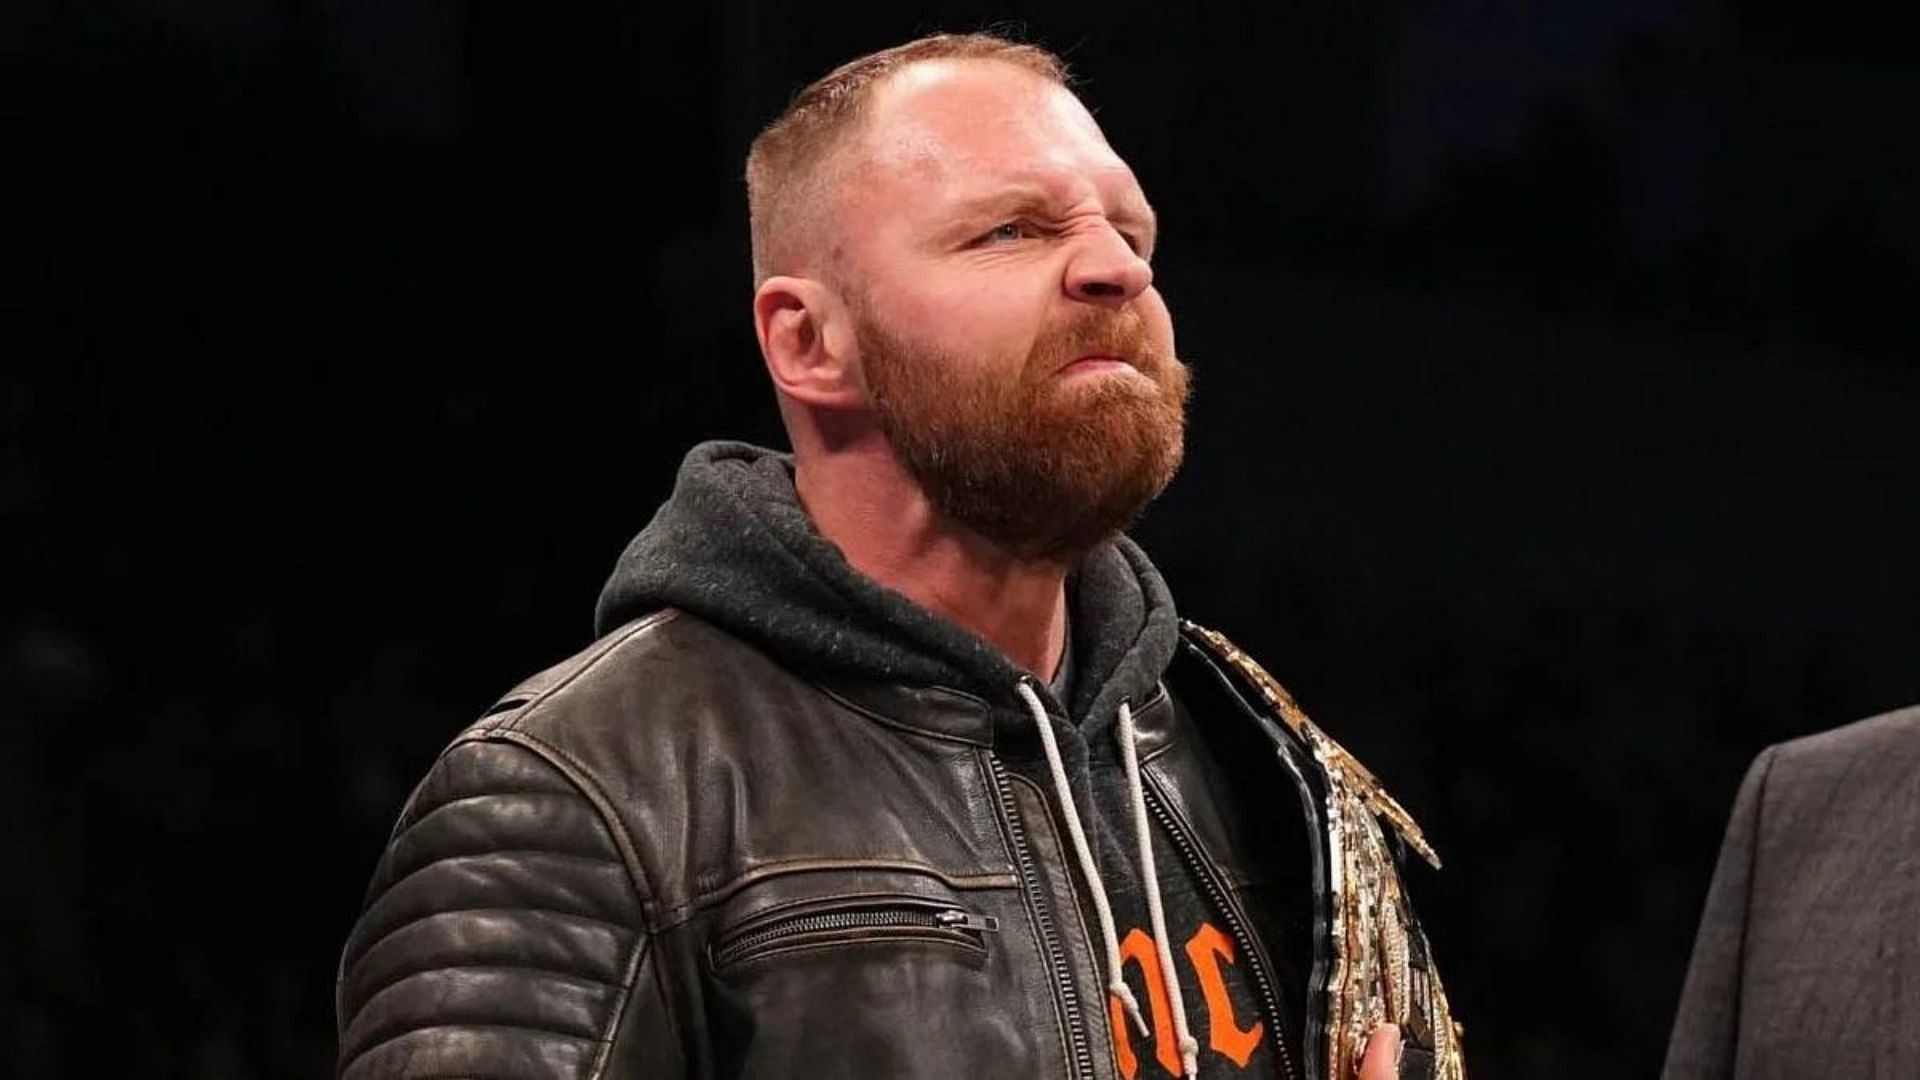 Jon Moxley is a former AEW World Champion and a member of the Blackpool Combat Club